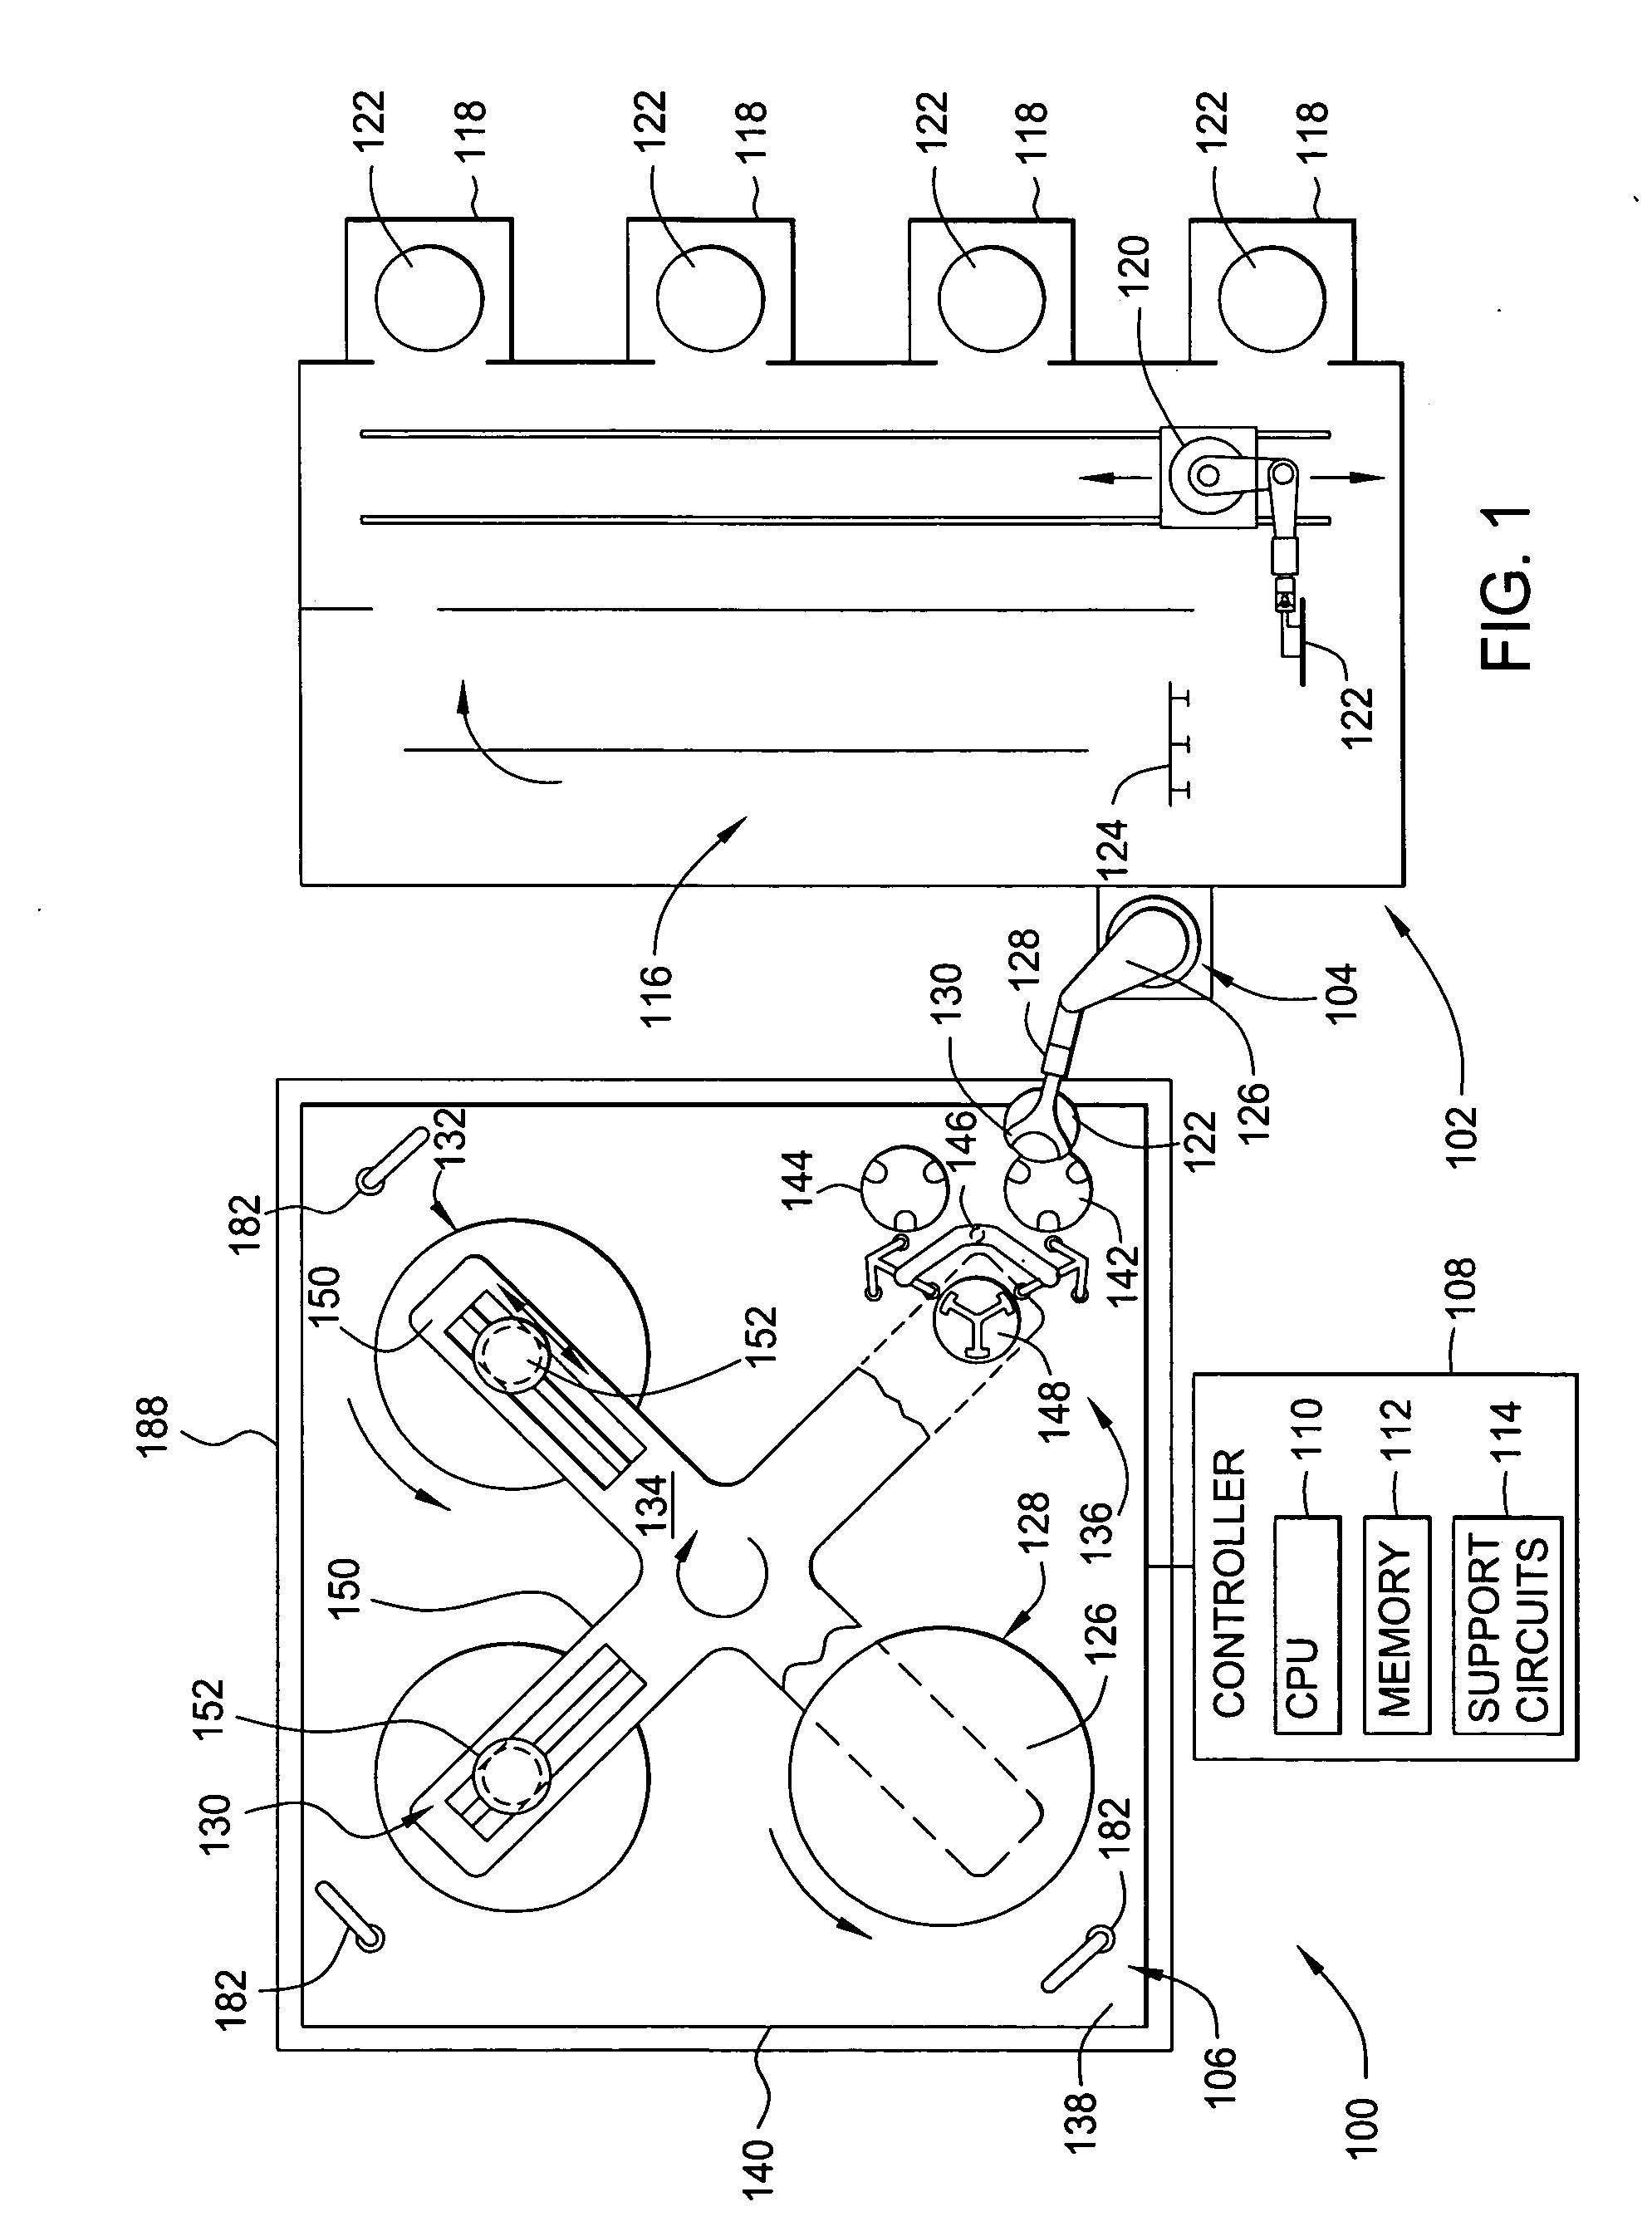 Contact assembly and method for electrochemical mechanical processing